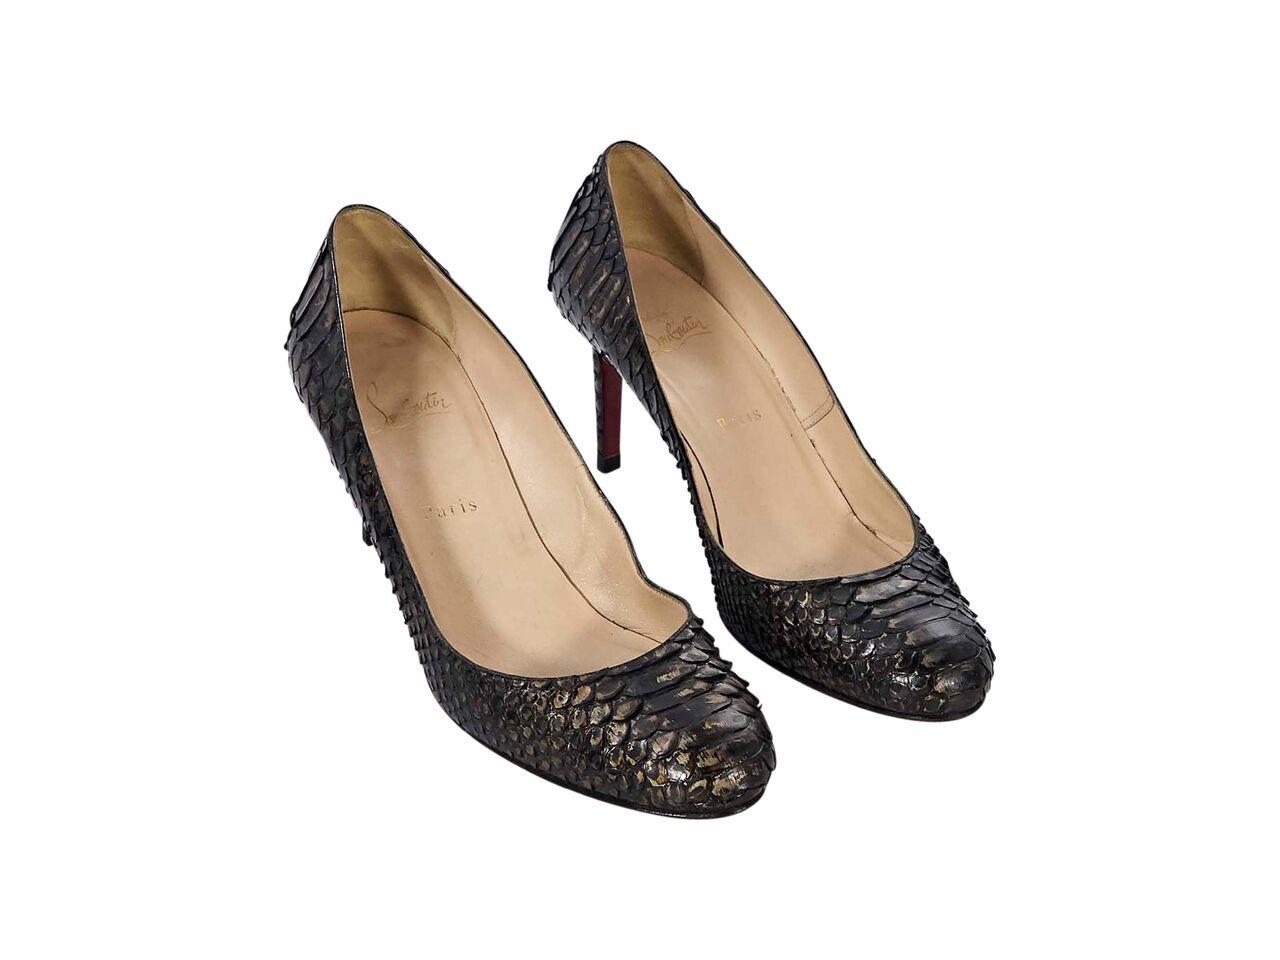 Product details:  Dark brown snakeskin pumps by Christian Louboutin.  Round toe.  Iconic red sole.  Slip-on style.  3